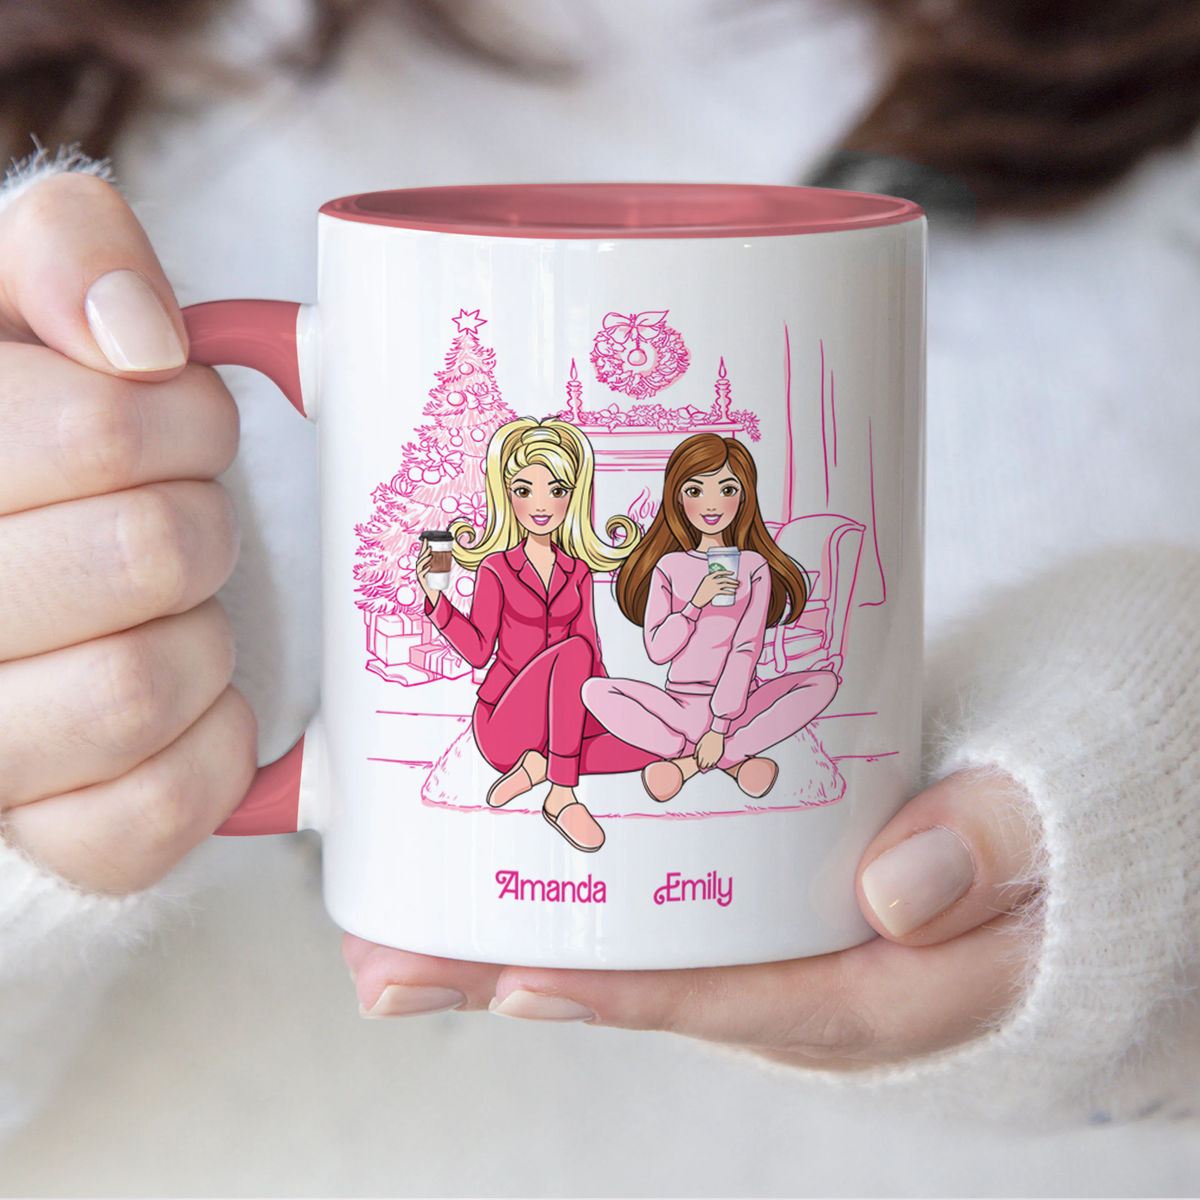 Personalized Mug - The Best Mug Ever - Pink Dolls - In Our Bestie Era - Novelty Gifts For Her (N3)_1